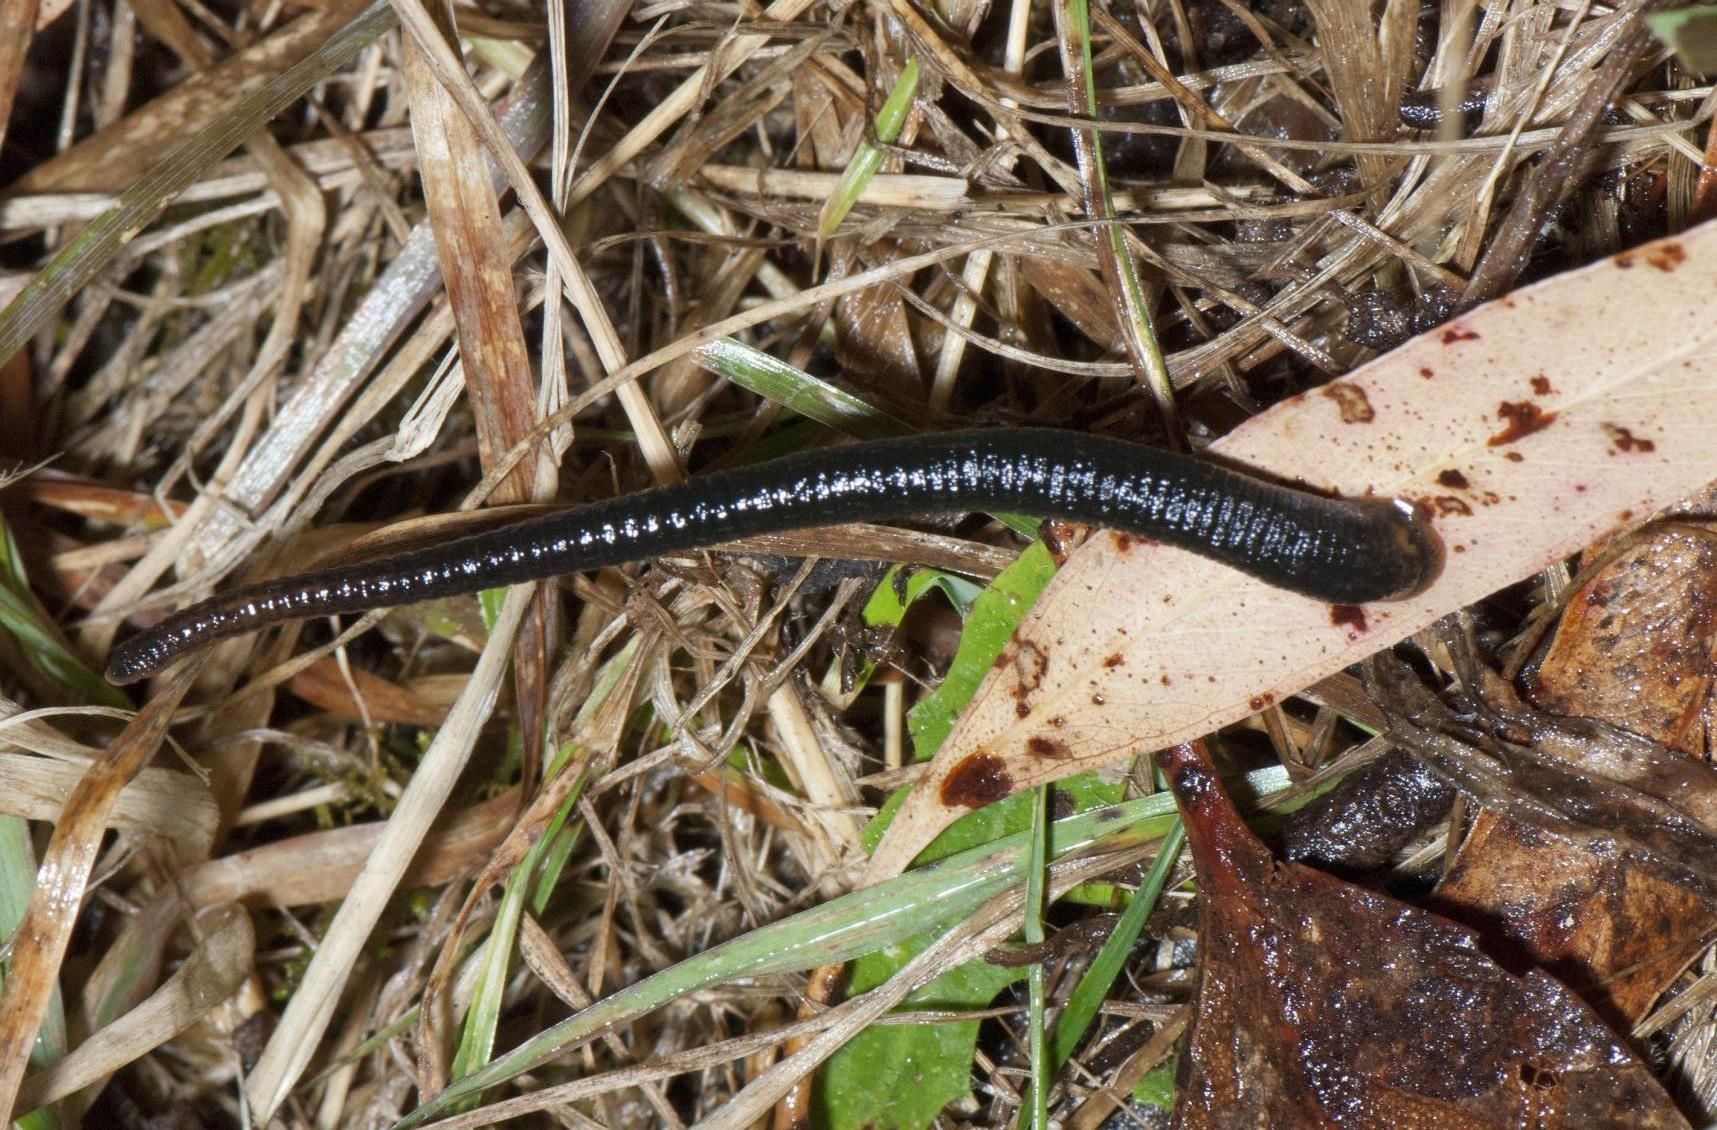 Don't be a sucker - get to know leeches